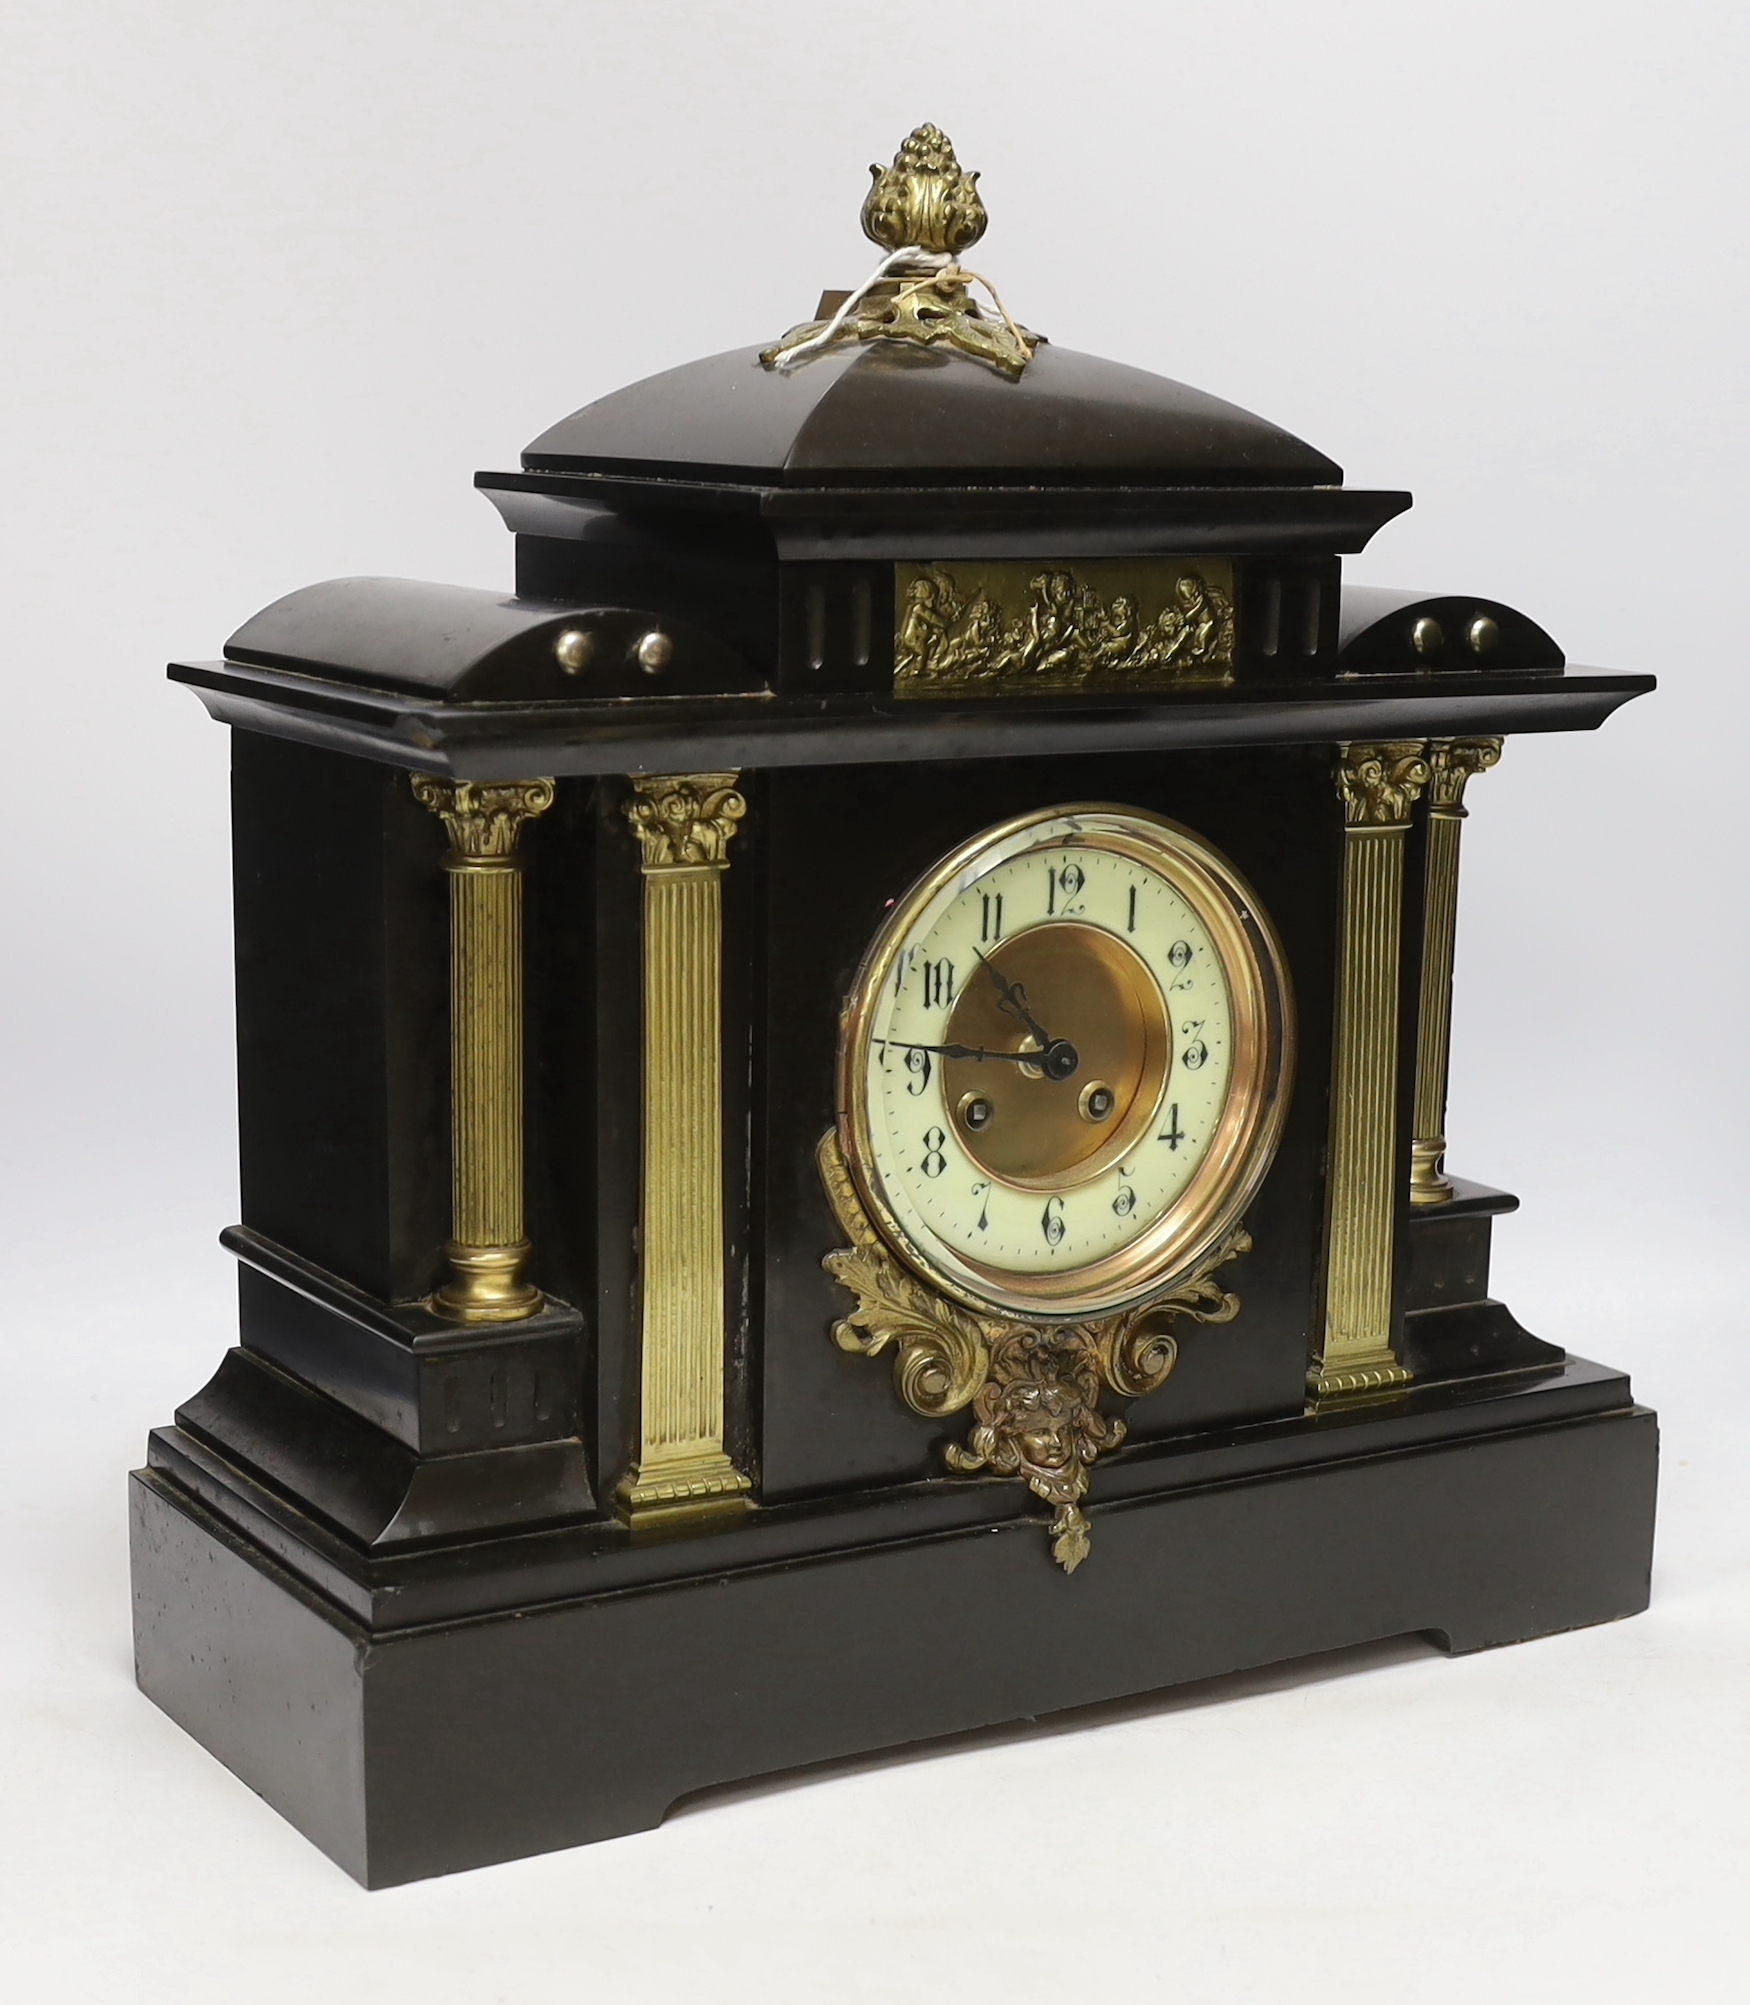 A black slate mantel clock with gilded pillars, striking on a coiled gong, 41cm high